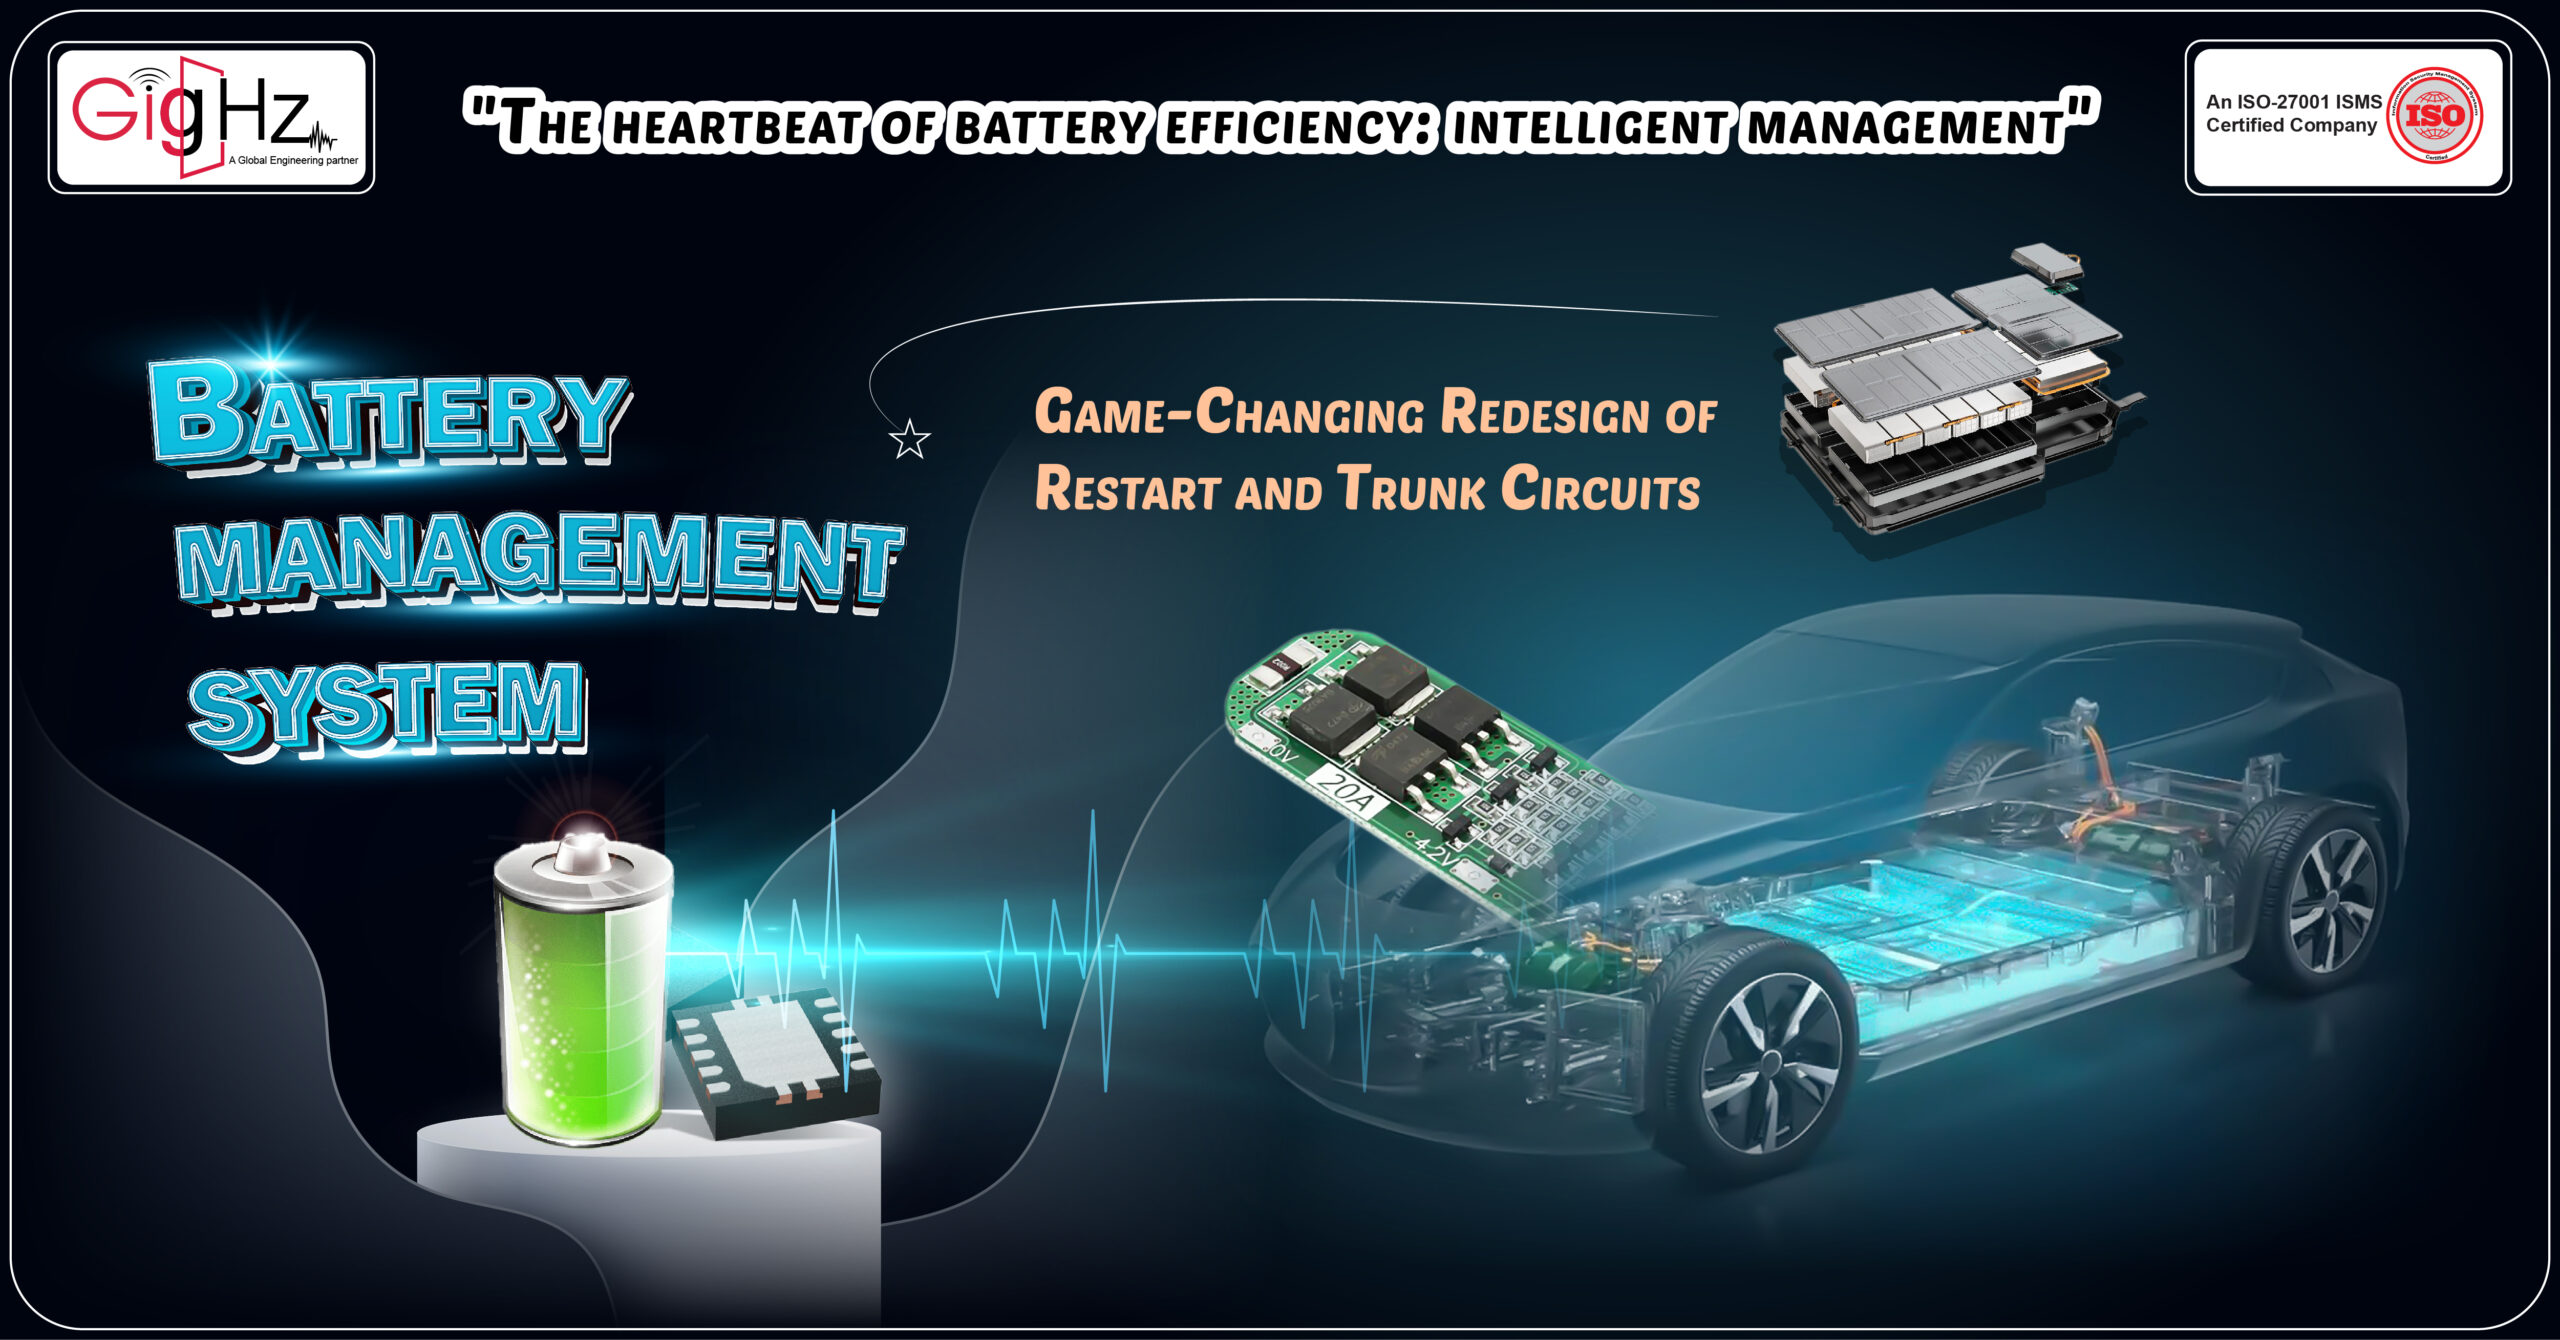 Game-Changing Redesign of Restart and Trunk Circuits of Battery Management System (BMS) for Enhanced Performance